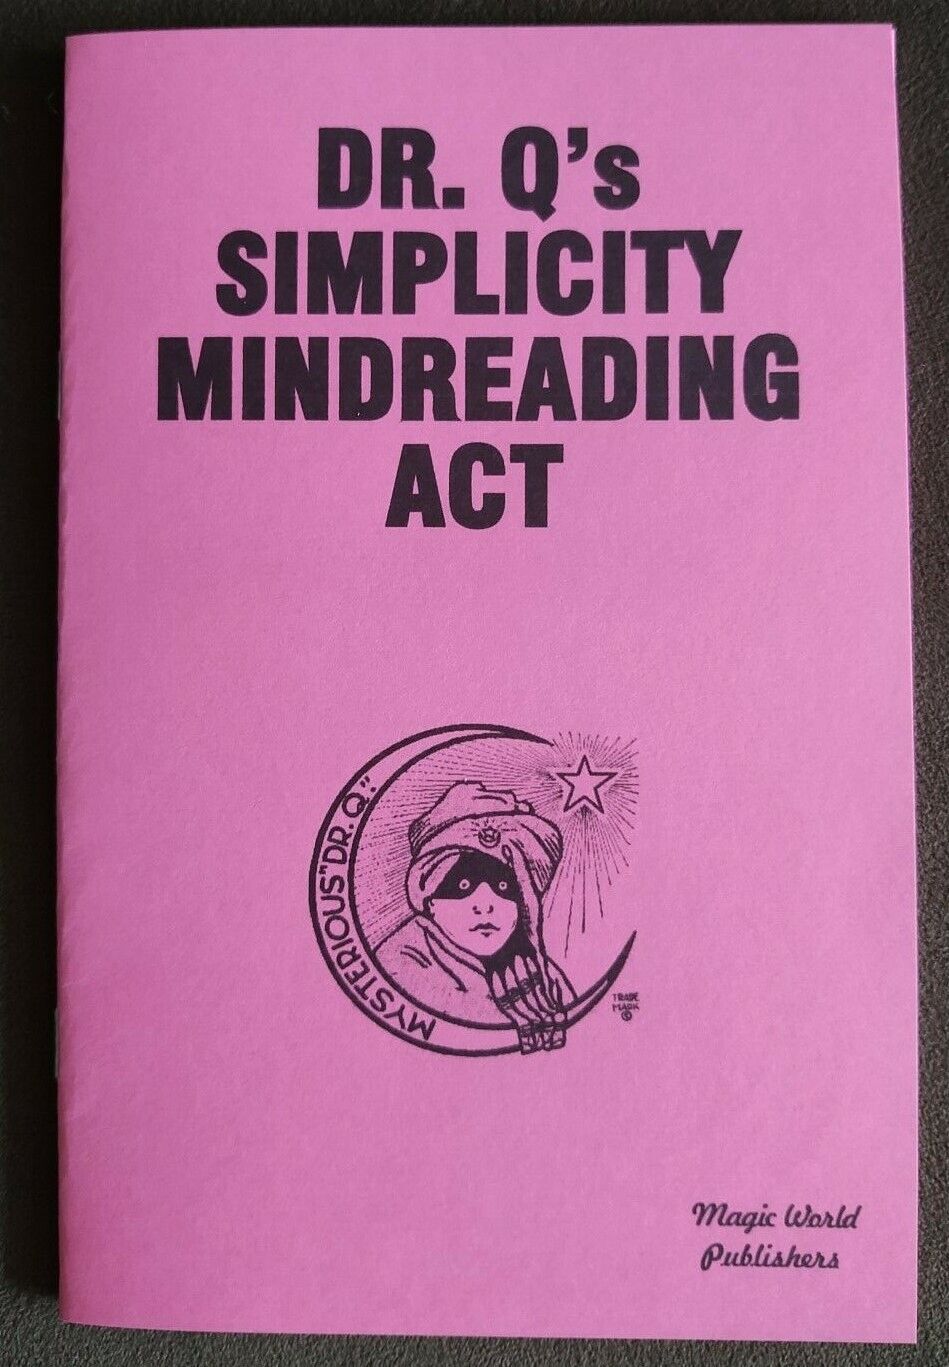 Dr. Q\'s Simplicity Mindreading Act (A 10-minute mental routine you can do)